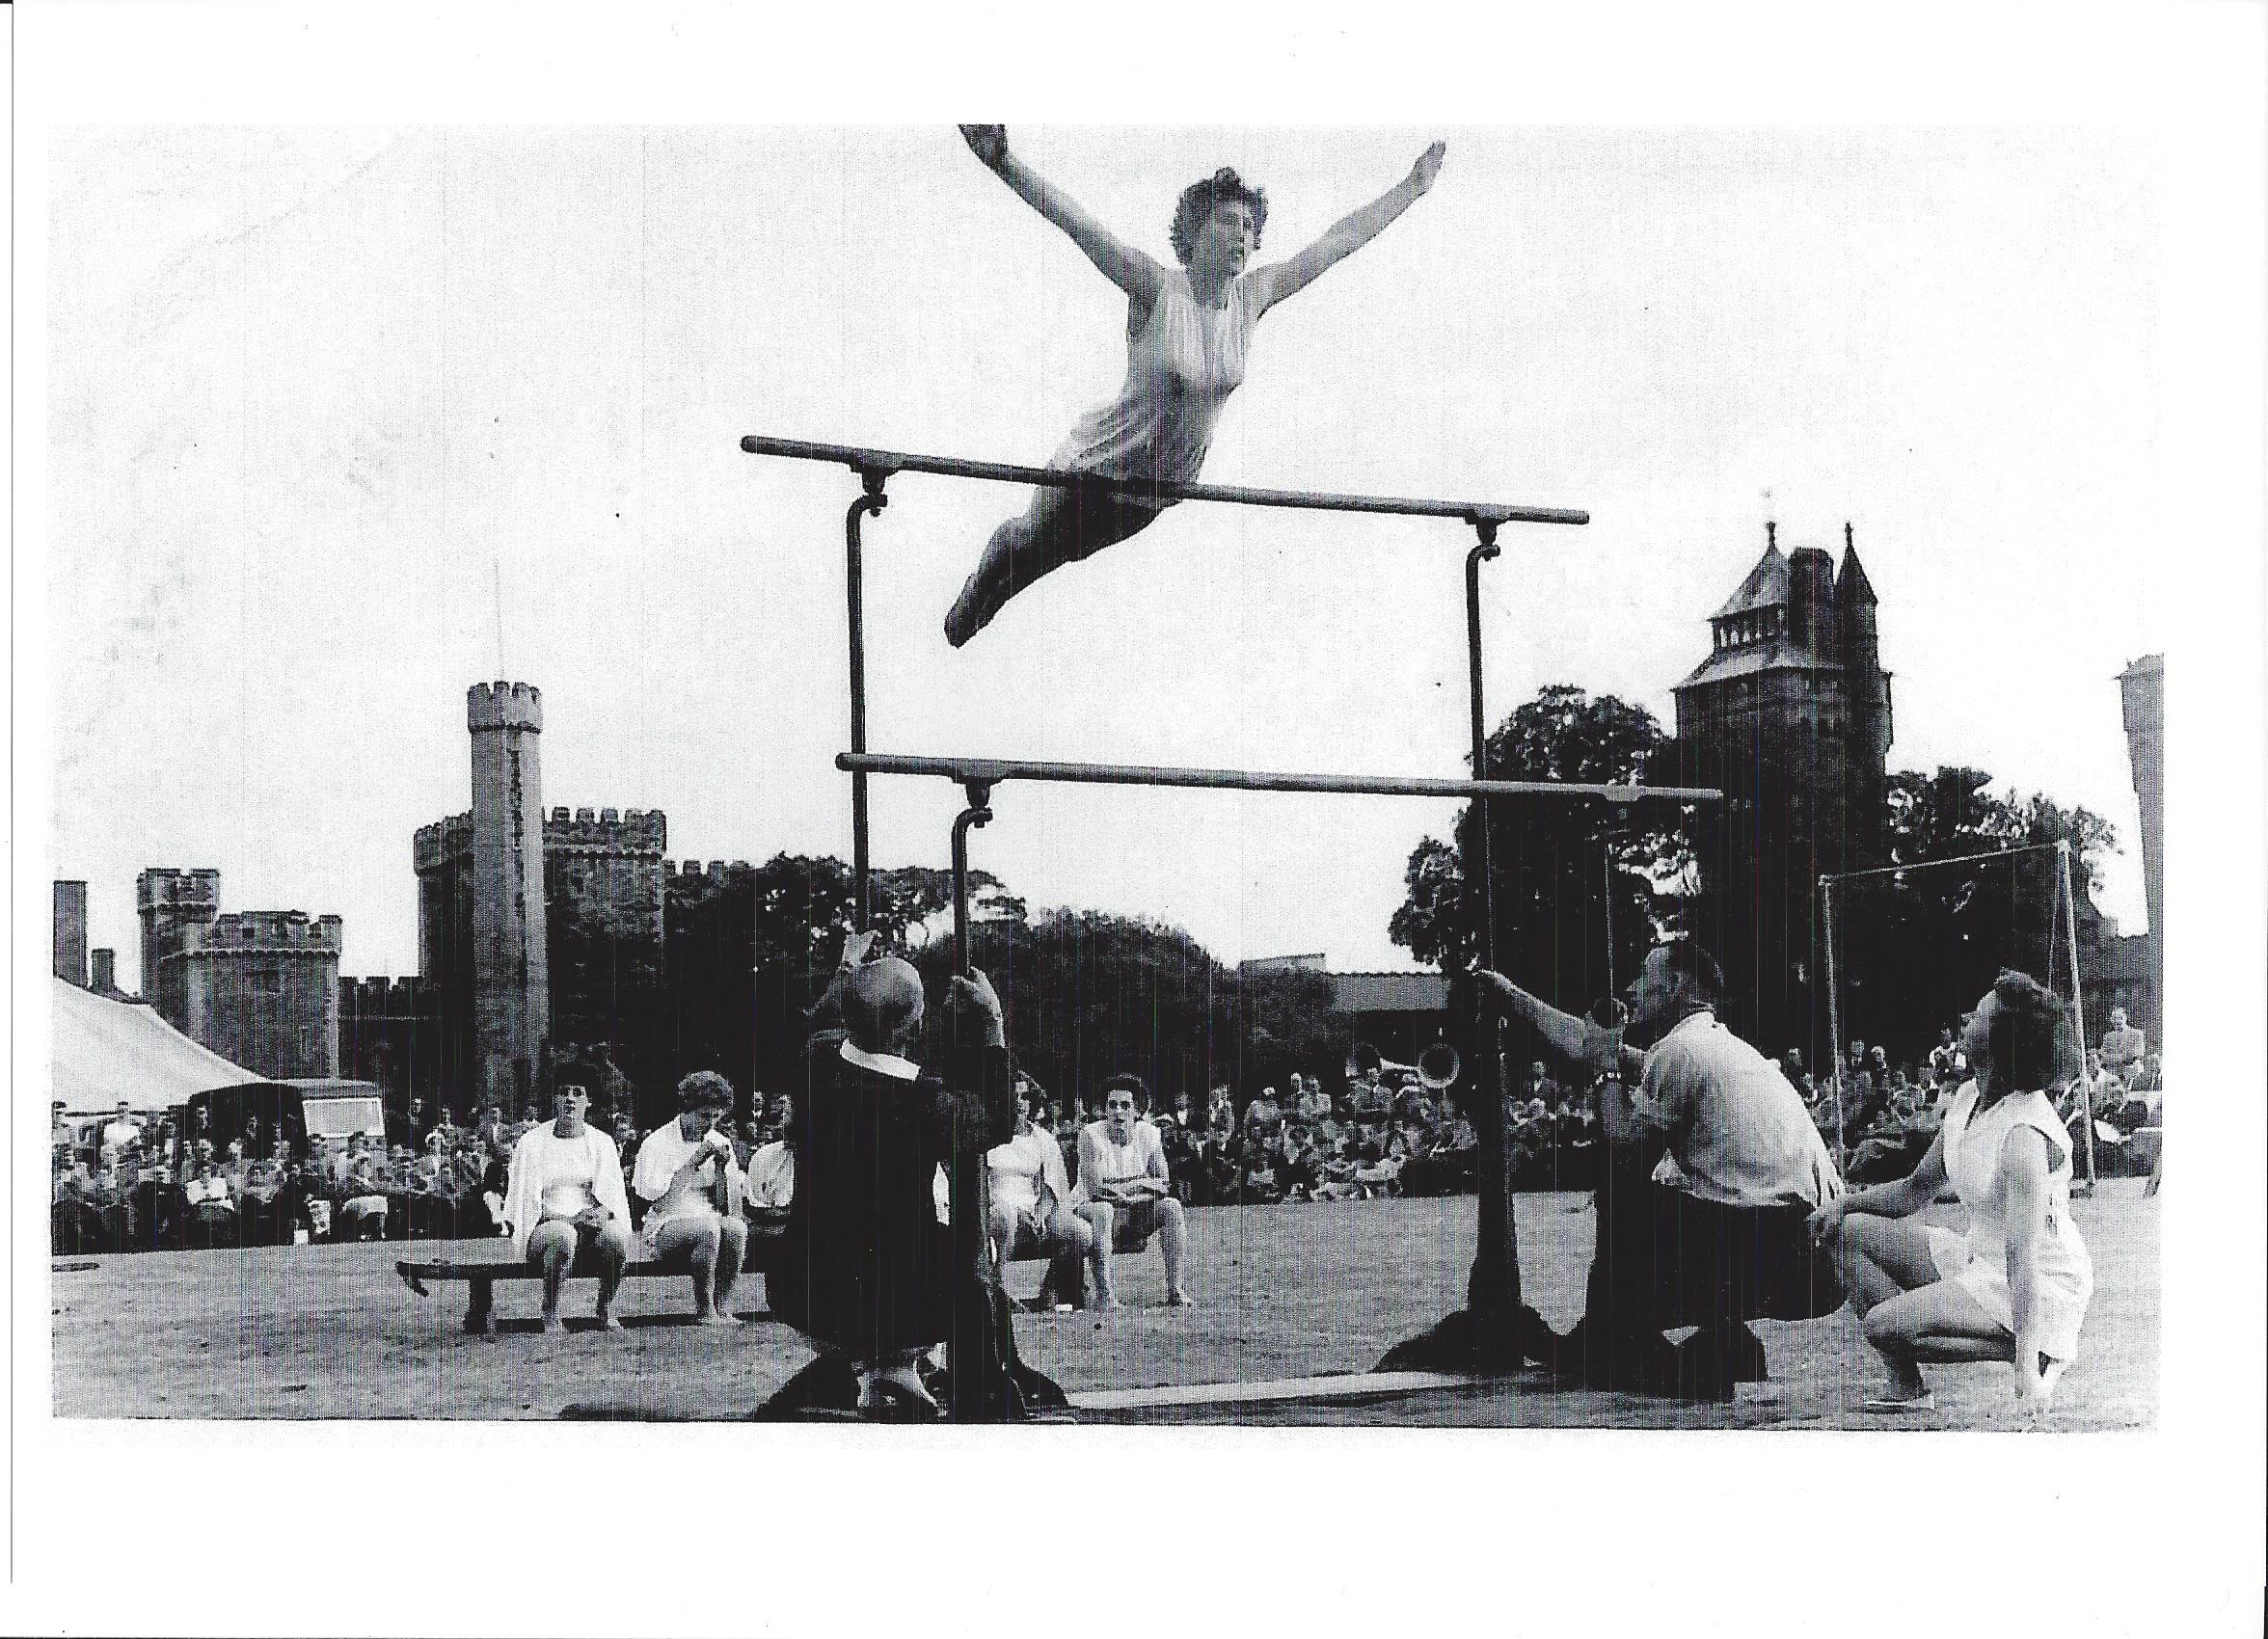 Majorie performing at Cardiff Castle in 1952 to raise money to get the gymnastics team to the Olympics